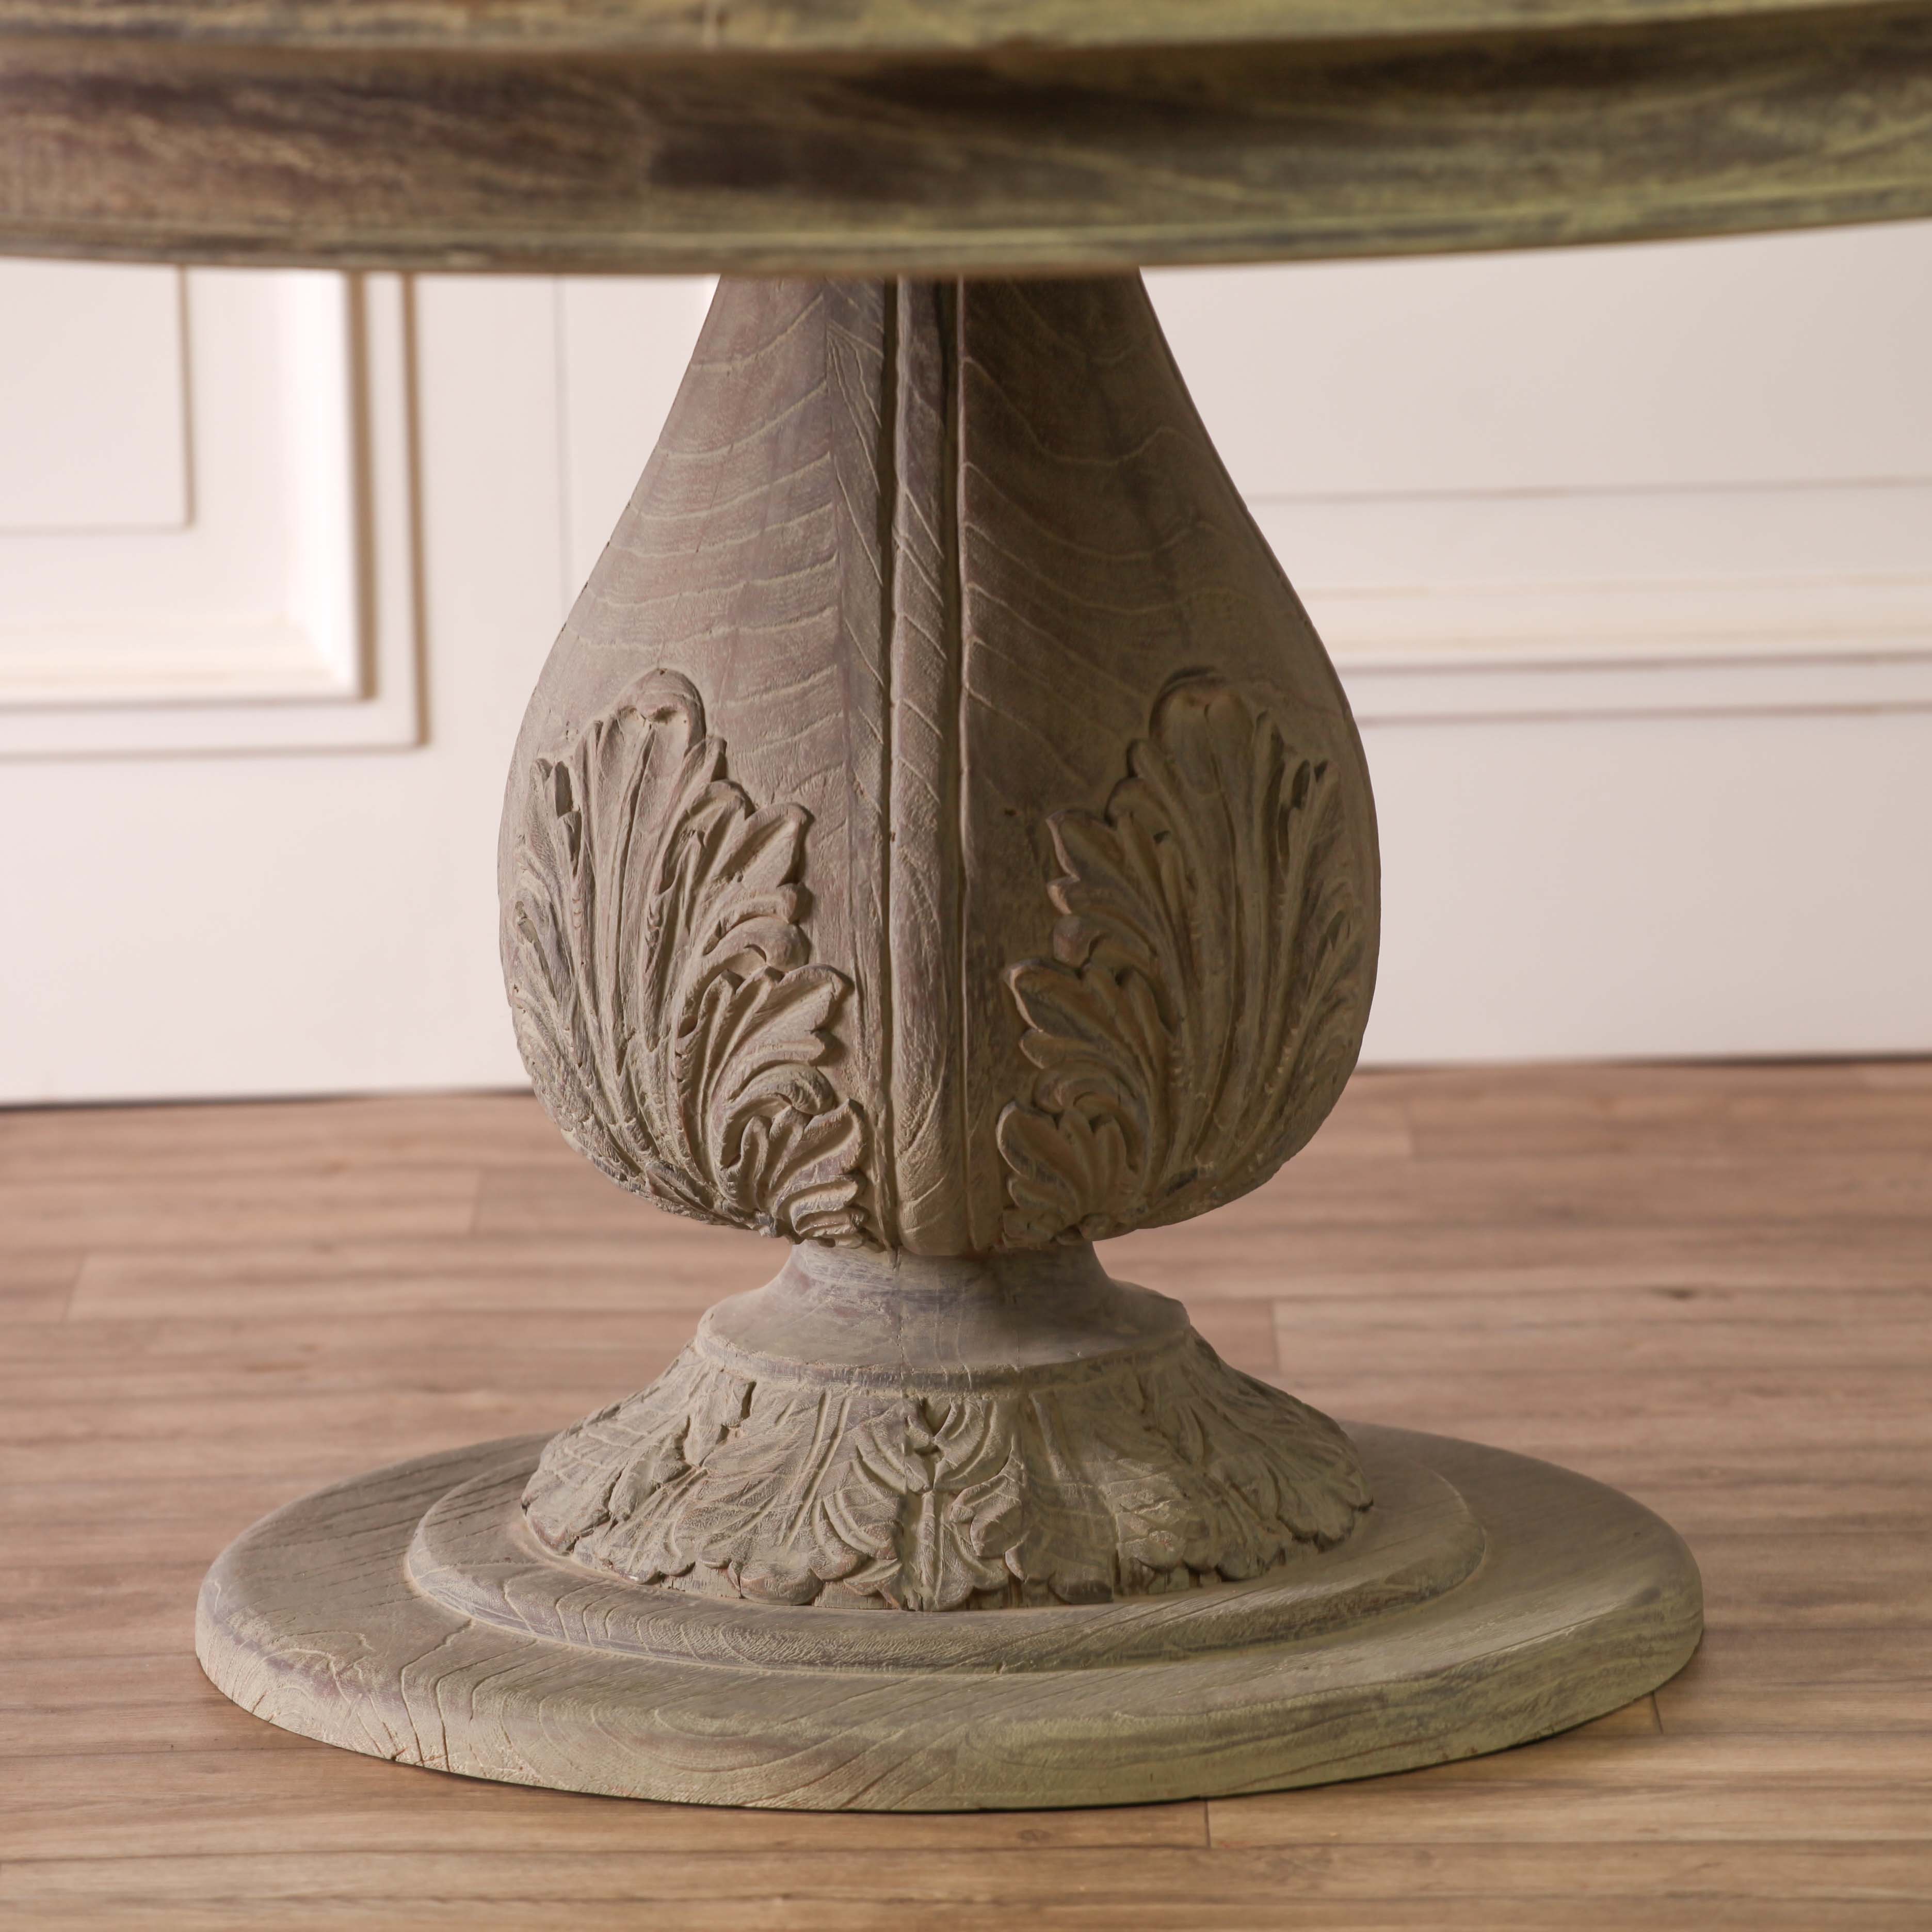 Rustic Washed Round Dining Table